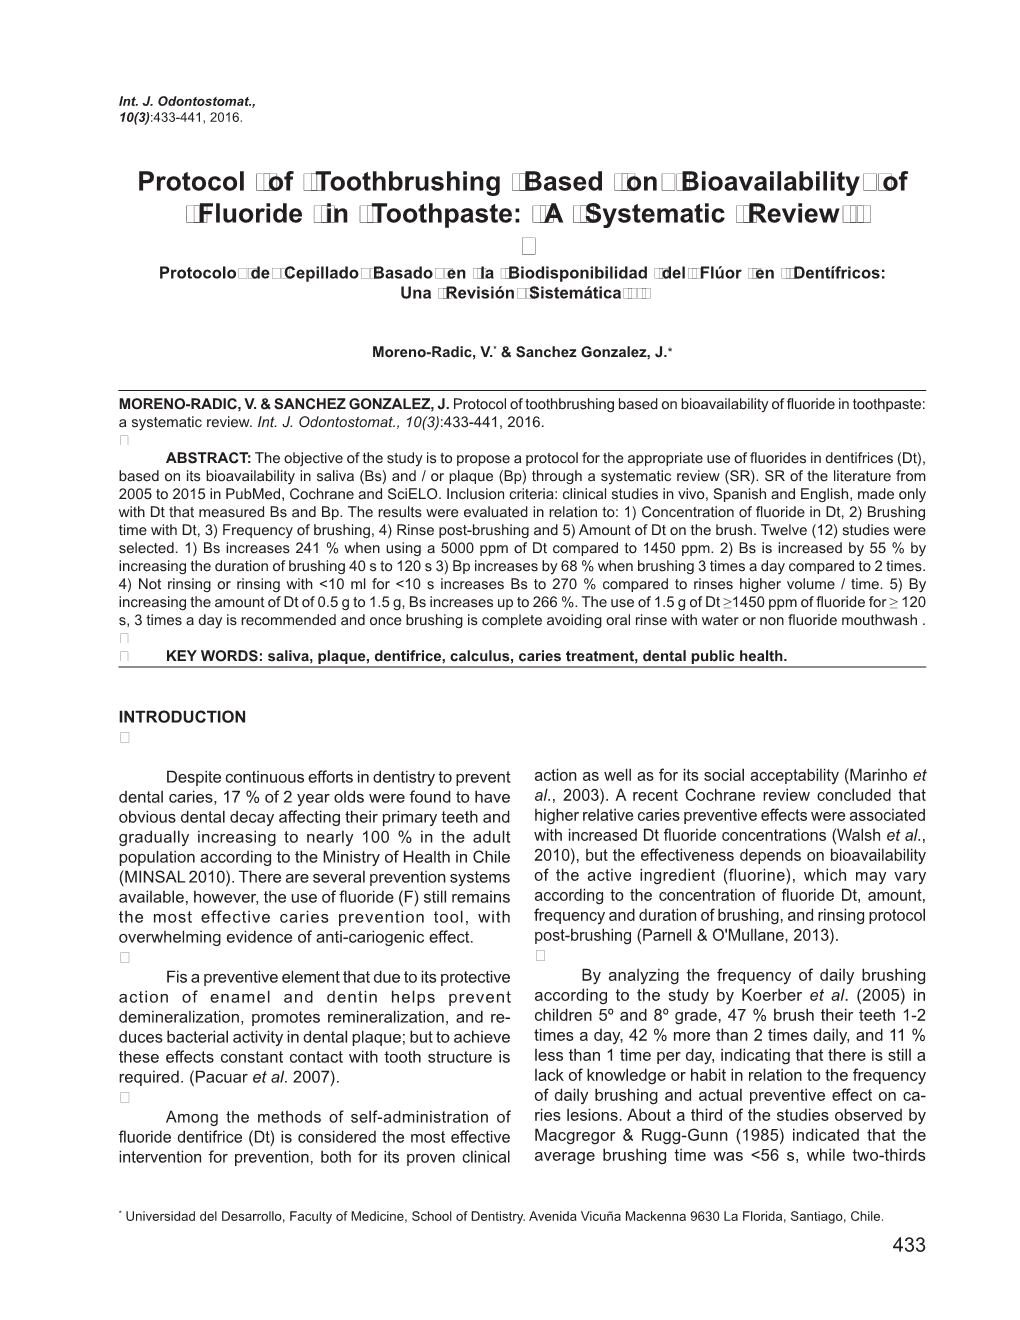 Protocol of Toothbrushing Based on Bioavailability of Fluoride in Toothpaste: a Systematic Review